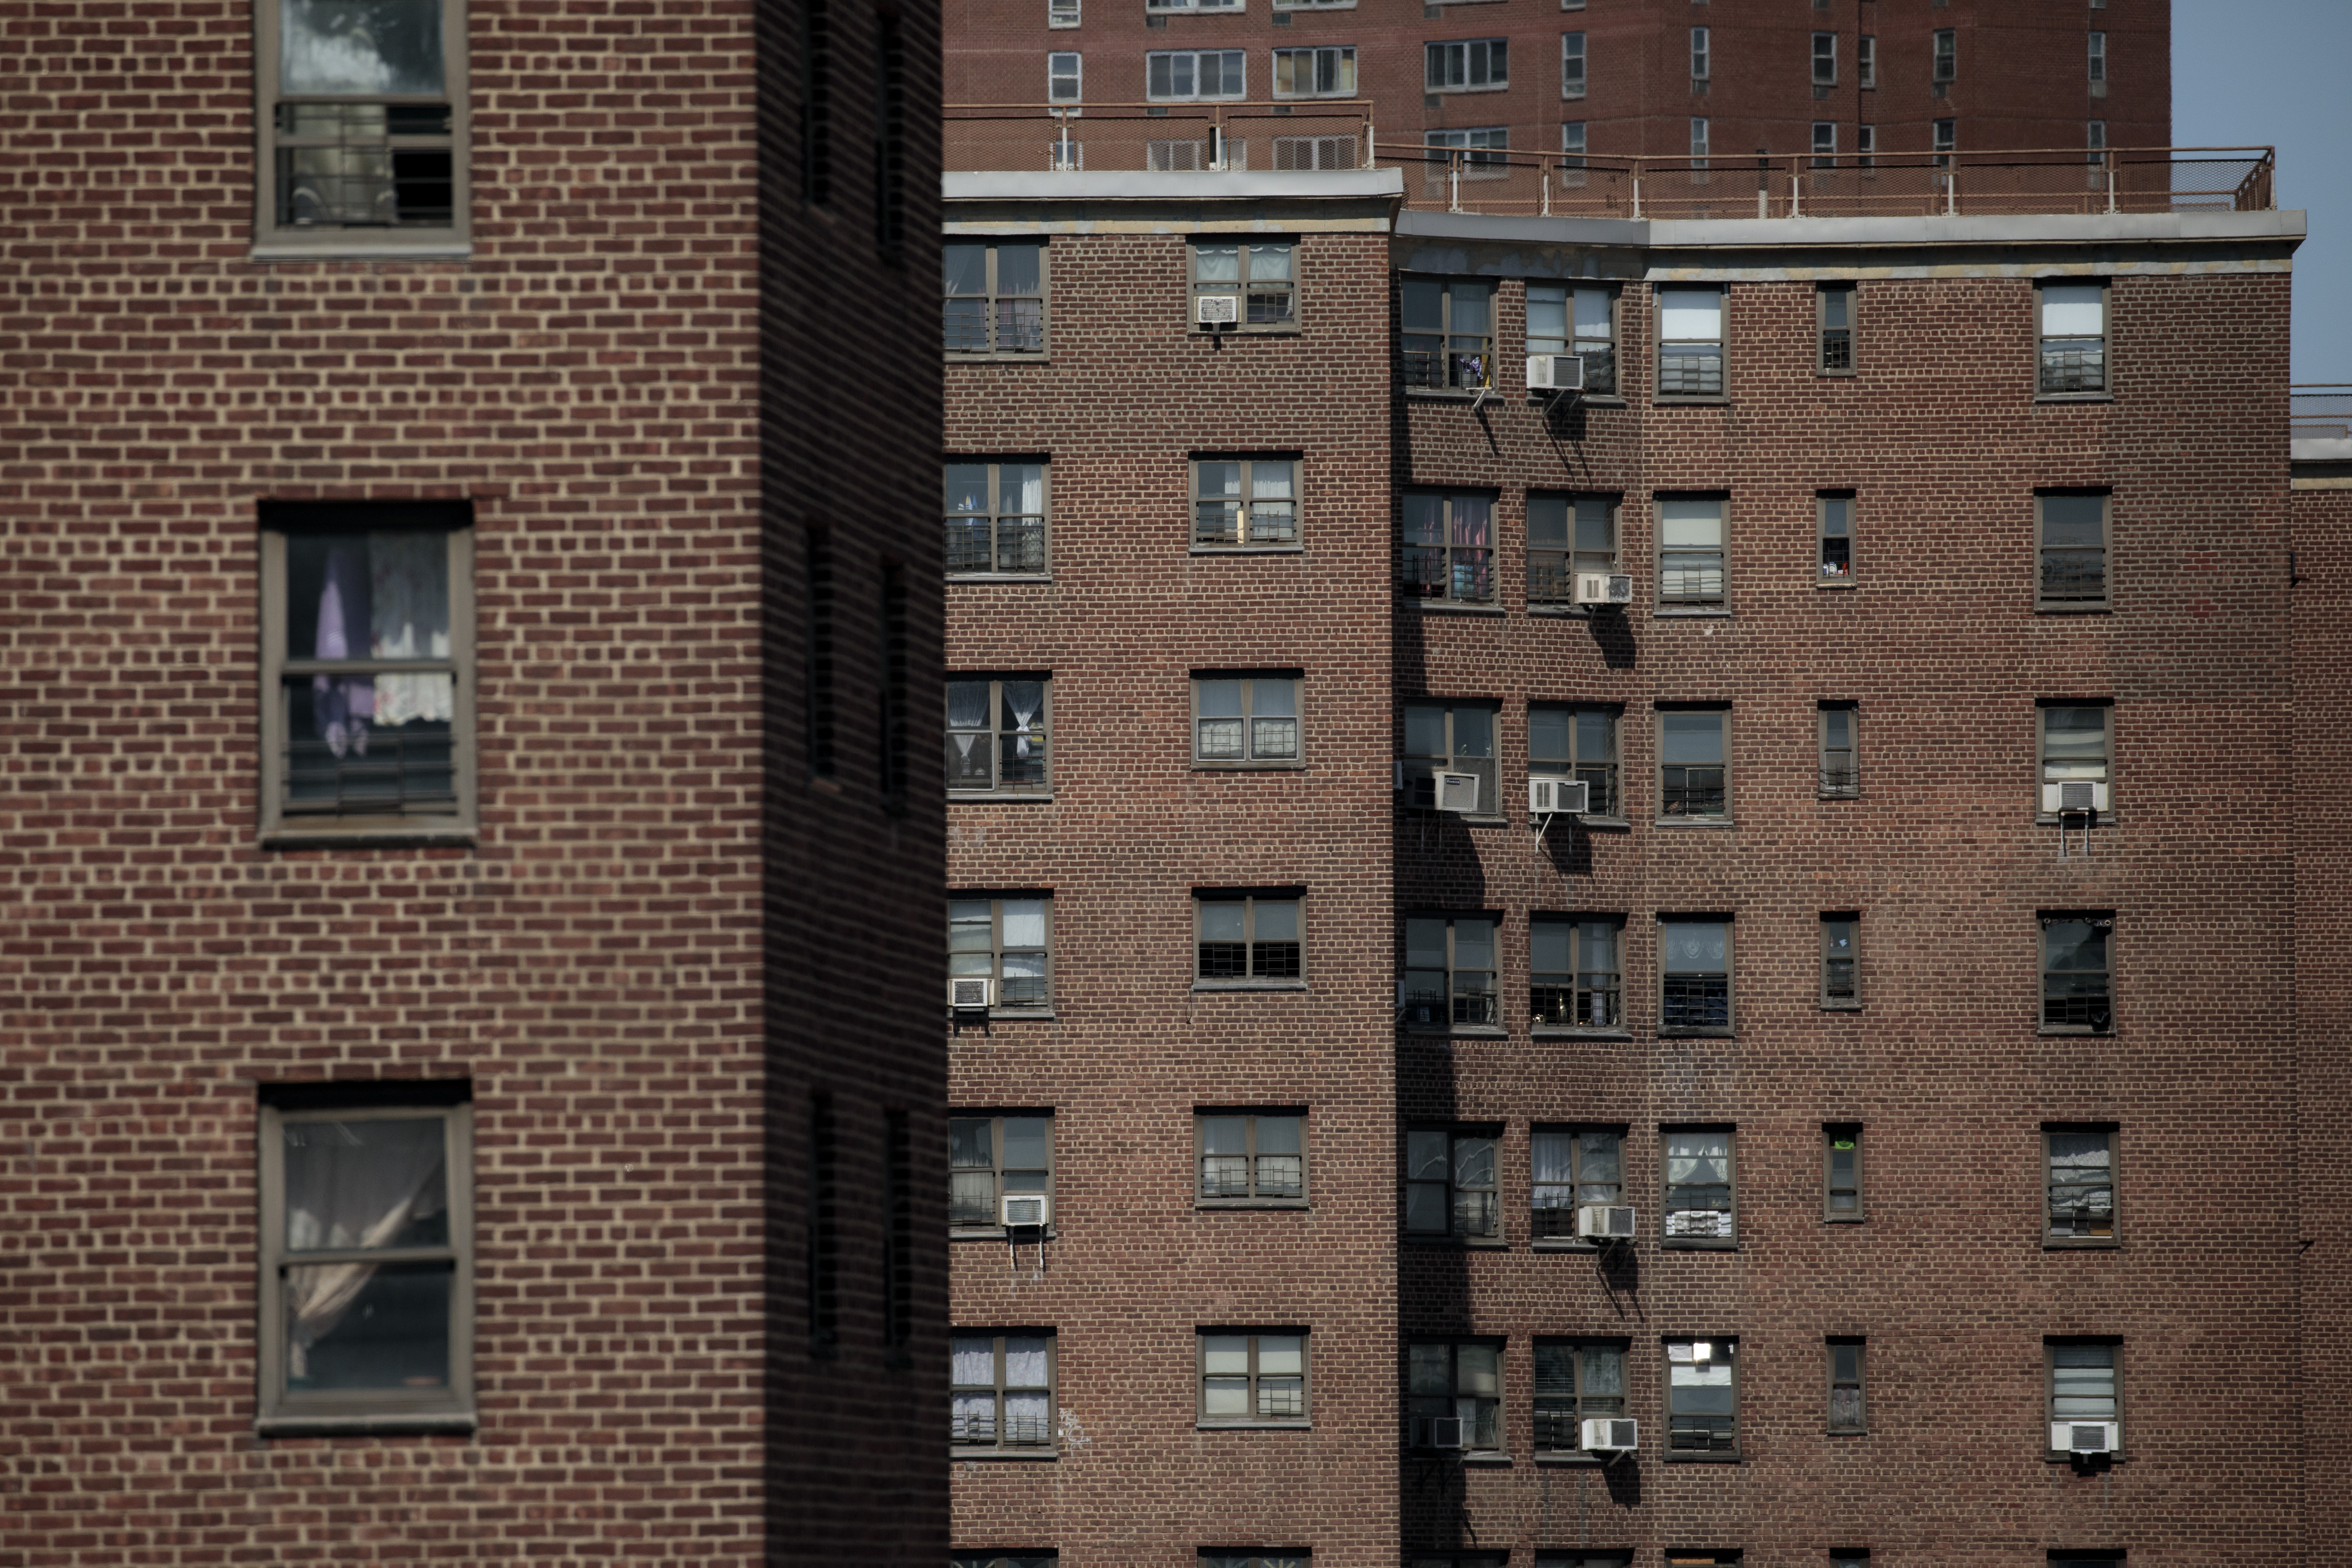 Several NYC housing authority (NYCHA) buildings in Manhattan. 